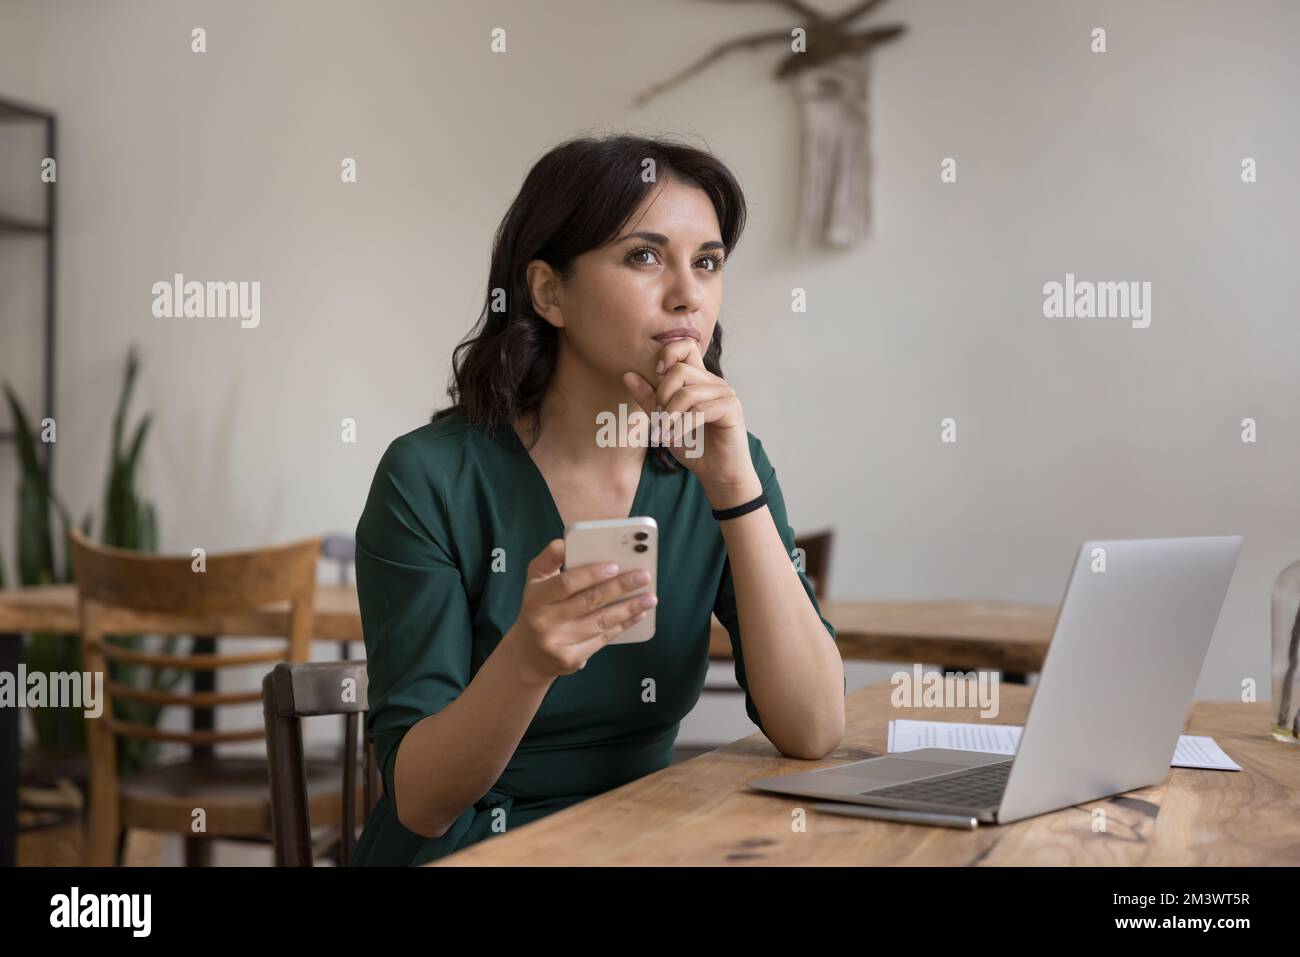 Serious pensive employee woman thinking over online project Stock Photo